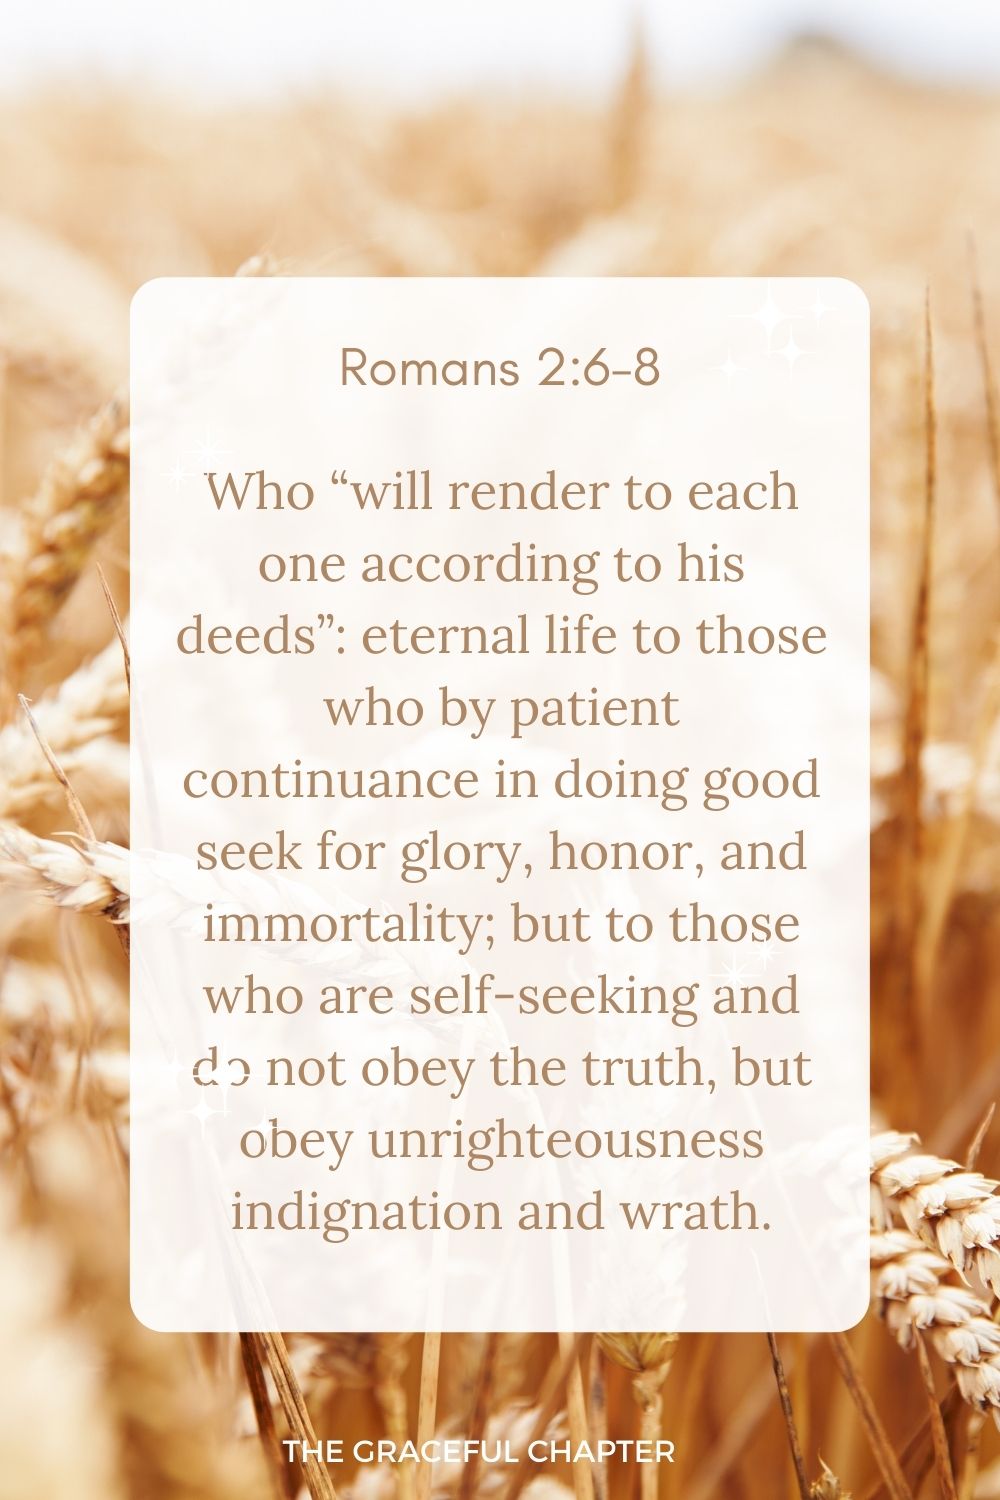 Who “will render to each one according to his deeds”: eternal life to those who by patient continuance in doing good seek for glory, honor, and immortality; but to those who are self-seeking and do not obey the truth, but obey unrighteousness indignation and wrath. Romans 2:6-8